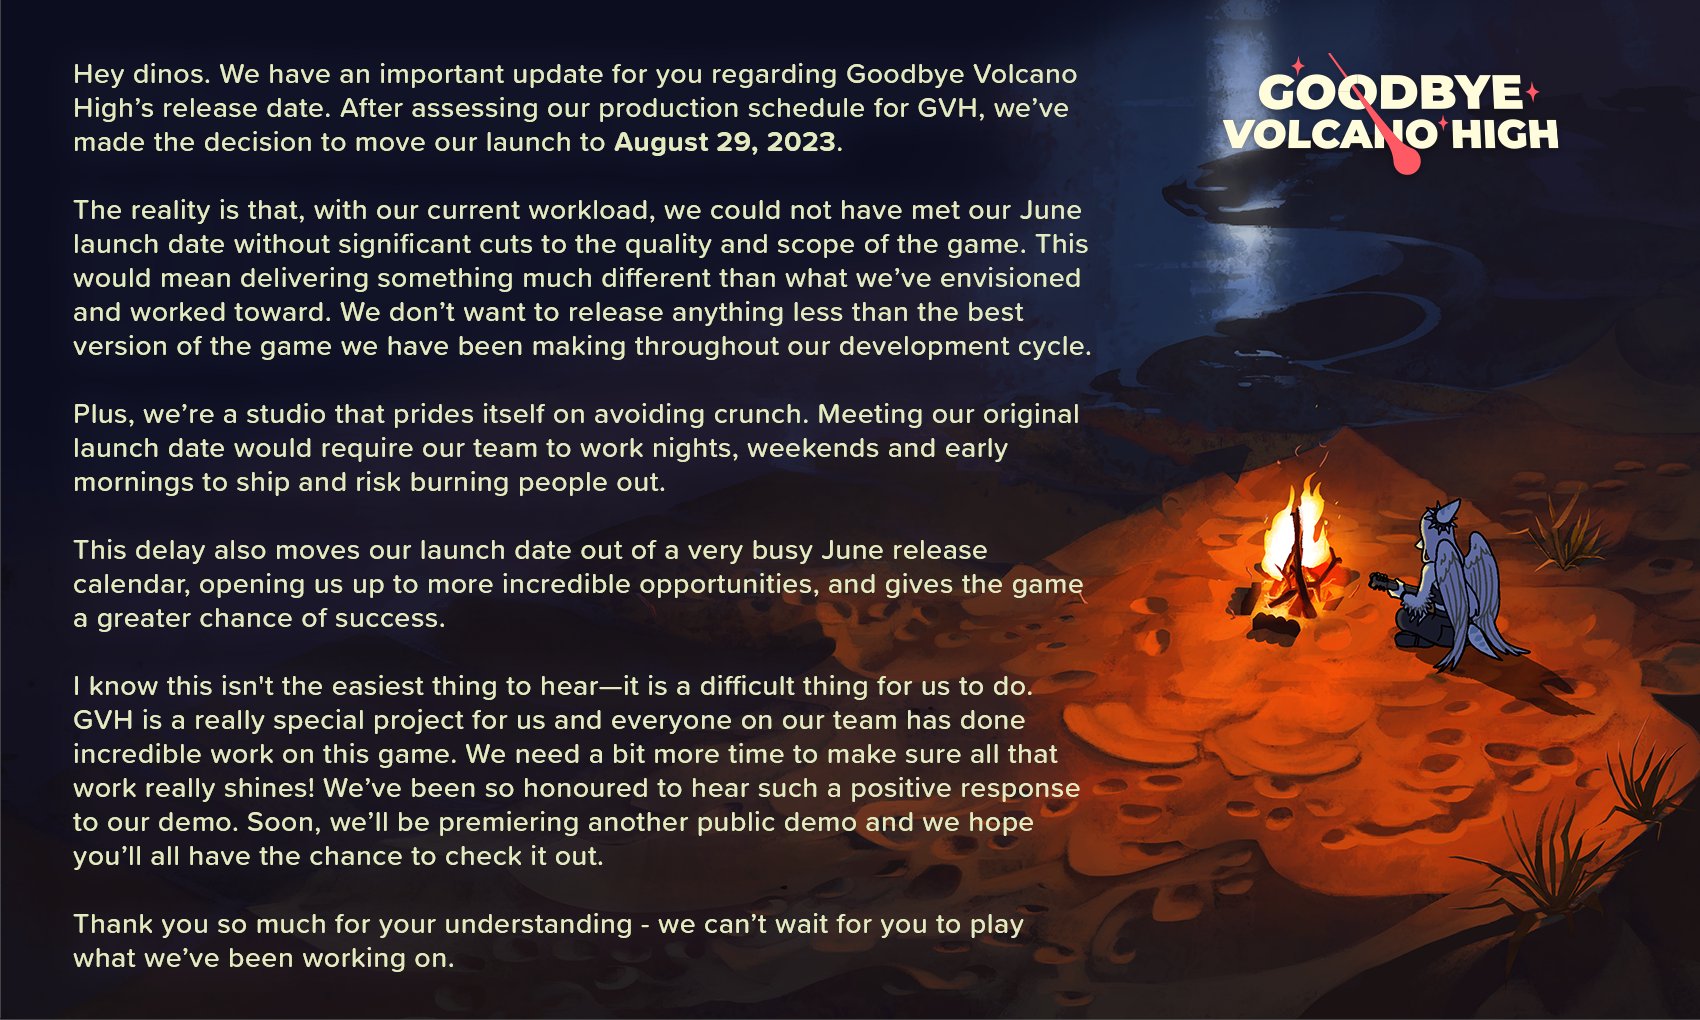 The announcement of Goodbye Volcano High's delay. It reads, in full: Hey dinos. We have an important update for you regarding Goodbye Volcano High’s release date. After assessing our production schedule for GVH, we’ve made the decision to move our launch to August 29, 2023. The reality is that, with our current workload, we could not have met our June launch date without significant cuts to the quality and scope of the game. This would mean delivering something much different than what we’ve envisioned and worked toward. We don’t want to release anything less than the best version of the game we have been making throughout our development cycle. Plus, we’re a studio that prides itself on avoiding crunch. Meeting our original launch date would require our team to work nights, weekends and early mornings to ship and risk burning people out. This delay also moves our launch date out of a very busy June release calendar, opening us up to more incredible opportunities, and gives the game a greater chance of success. I know this isn't the easiest thing to hear—it is a difficult thing for us to do. GVH is a really special project for us and everyone on our team has done incredible work on this game. We need a bit more time to make sure all that work really shines! We’ve been so honoured to hear such a positive response to our demo. Soon, we’ll be premiering another public demo and we hope you’ll all have the chance to check it out. Thank you so much for your understanding - we can’t wait for you to play what we’ve been working on.